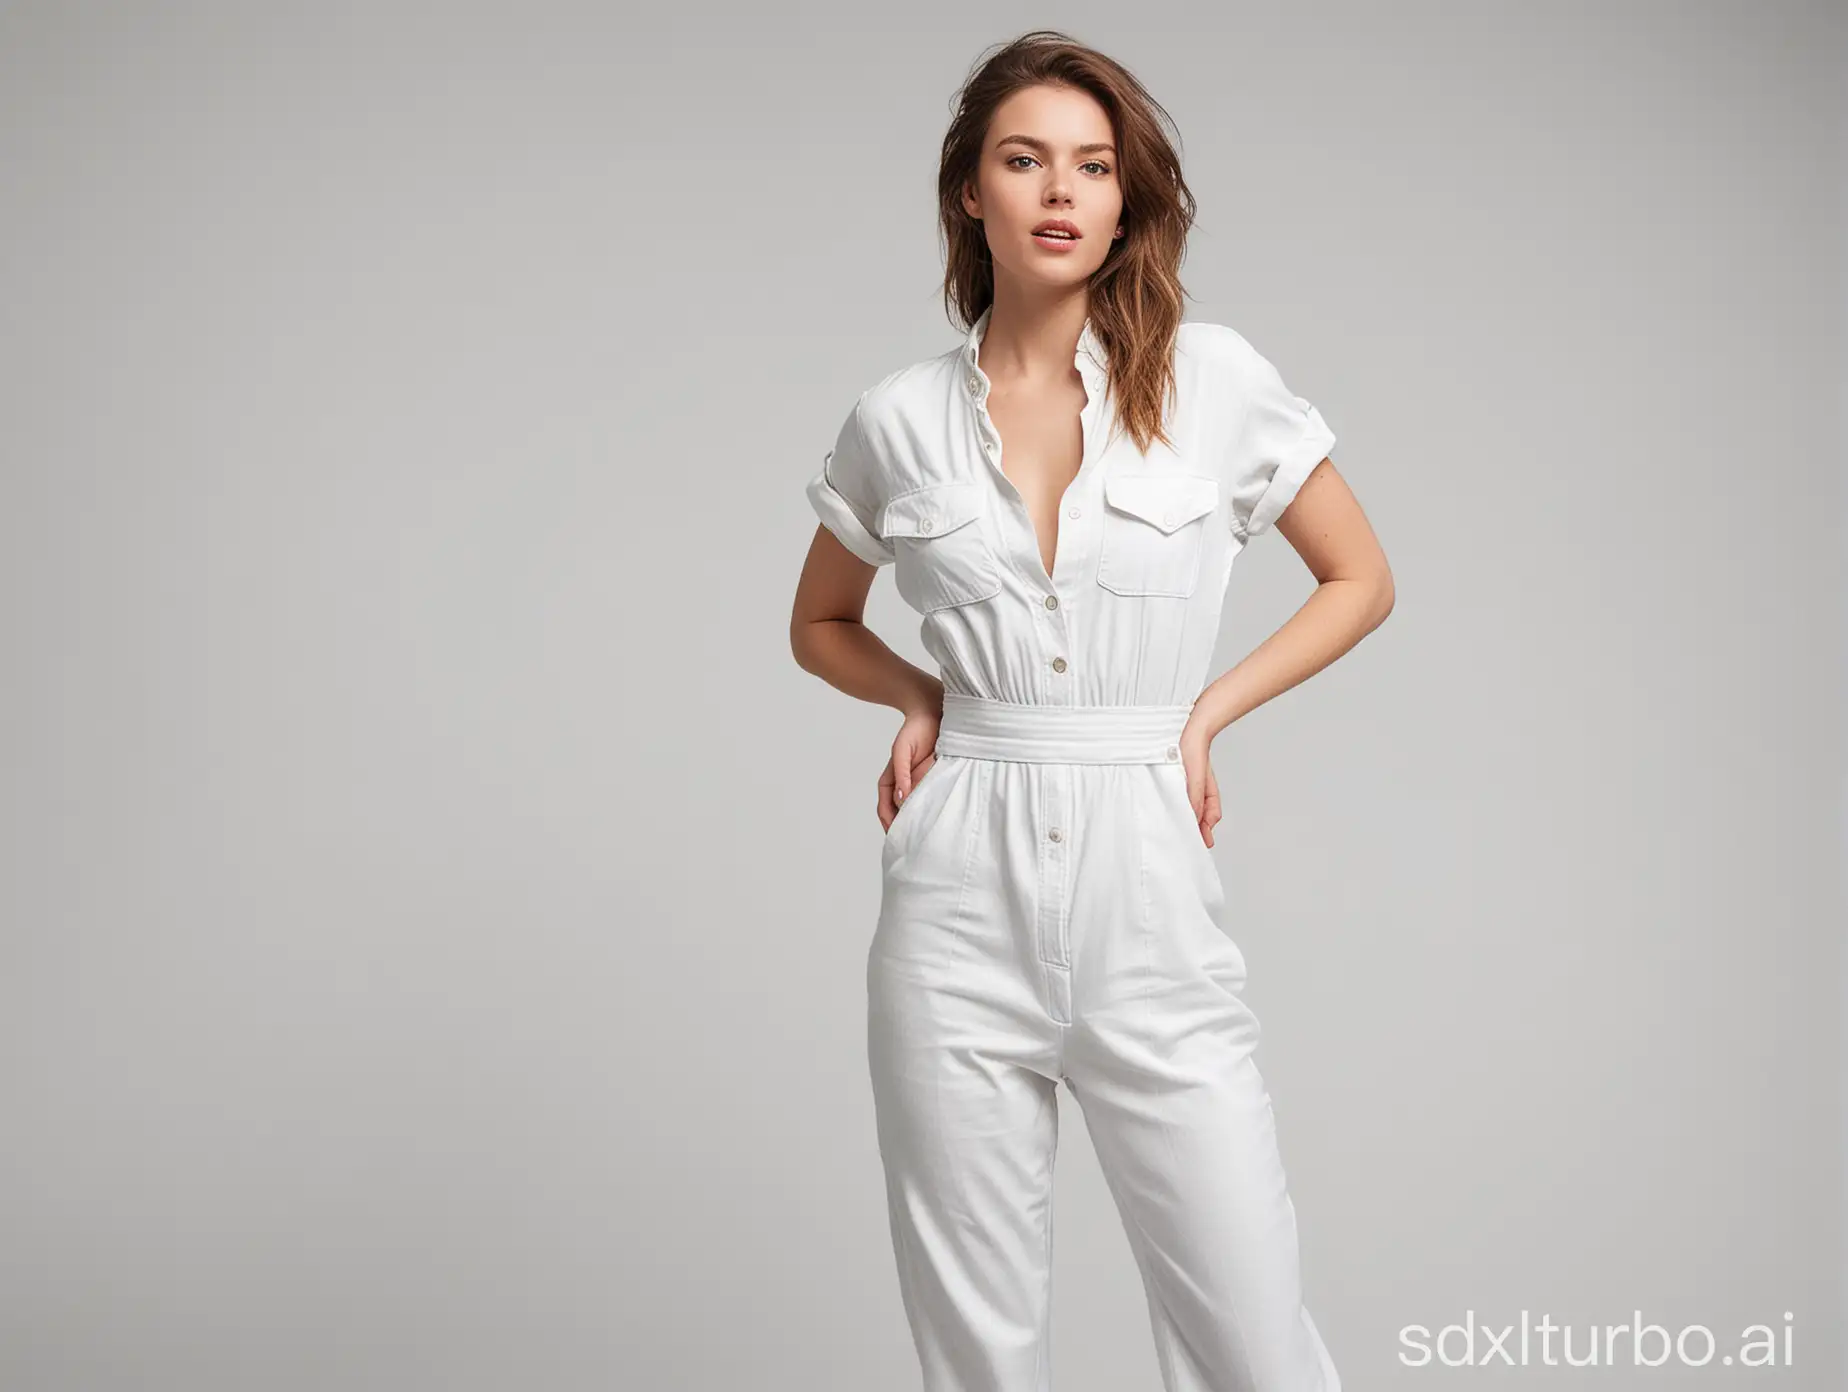 Stylish-Model-Posing-Upright-in-HighResolution-Jumpsuit-on-Pure-White-Background